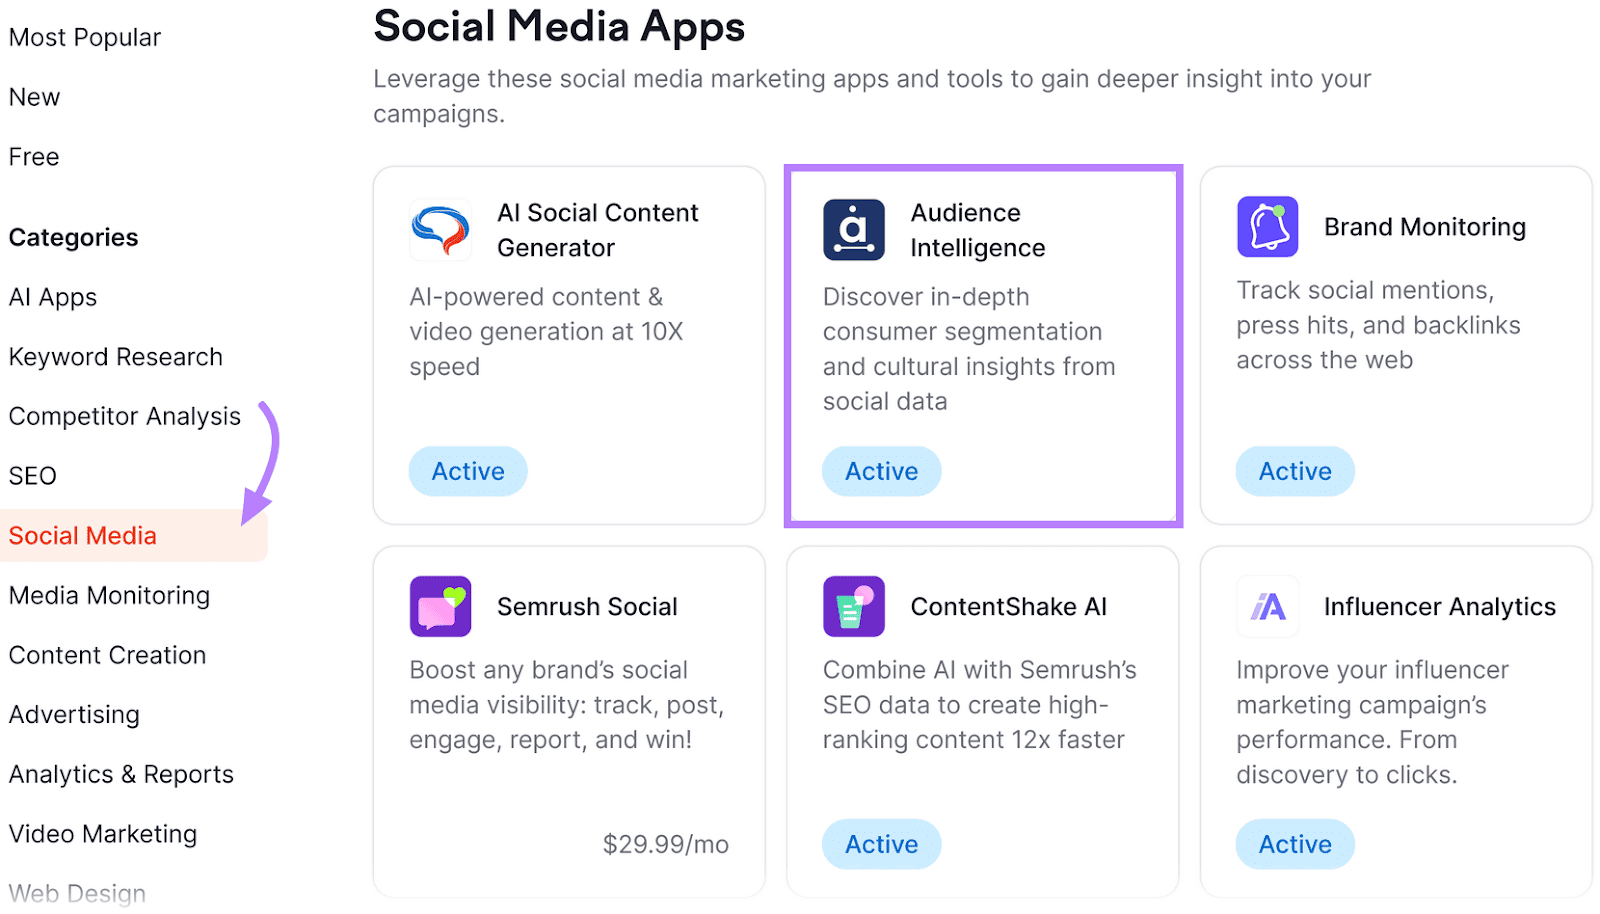 Semrush app center UI listing social media apps, showing "Audience Intelligence" in a purple box.